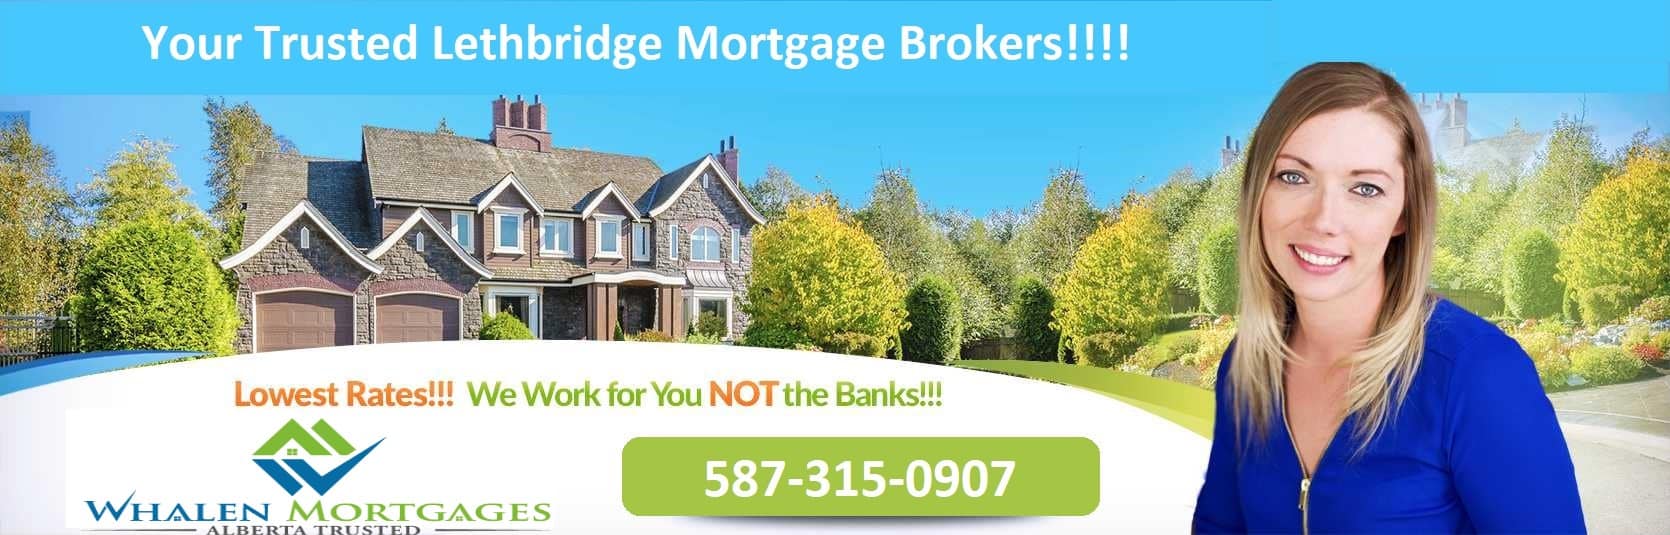 Lethbridge Scotia Bank Mortgages | Lowest Mortgage Rates